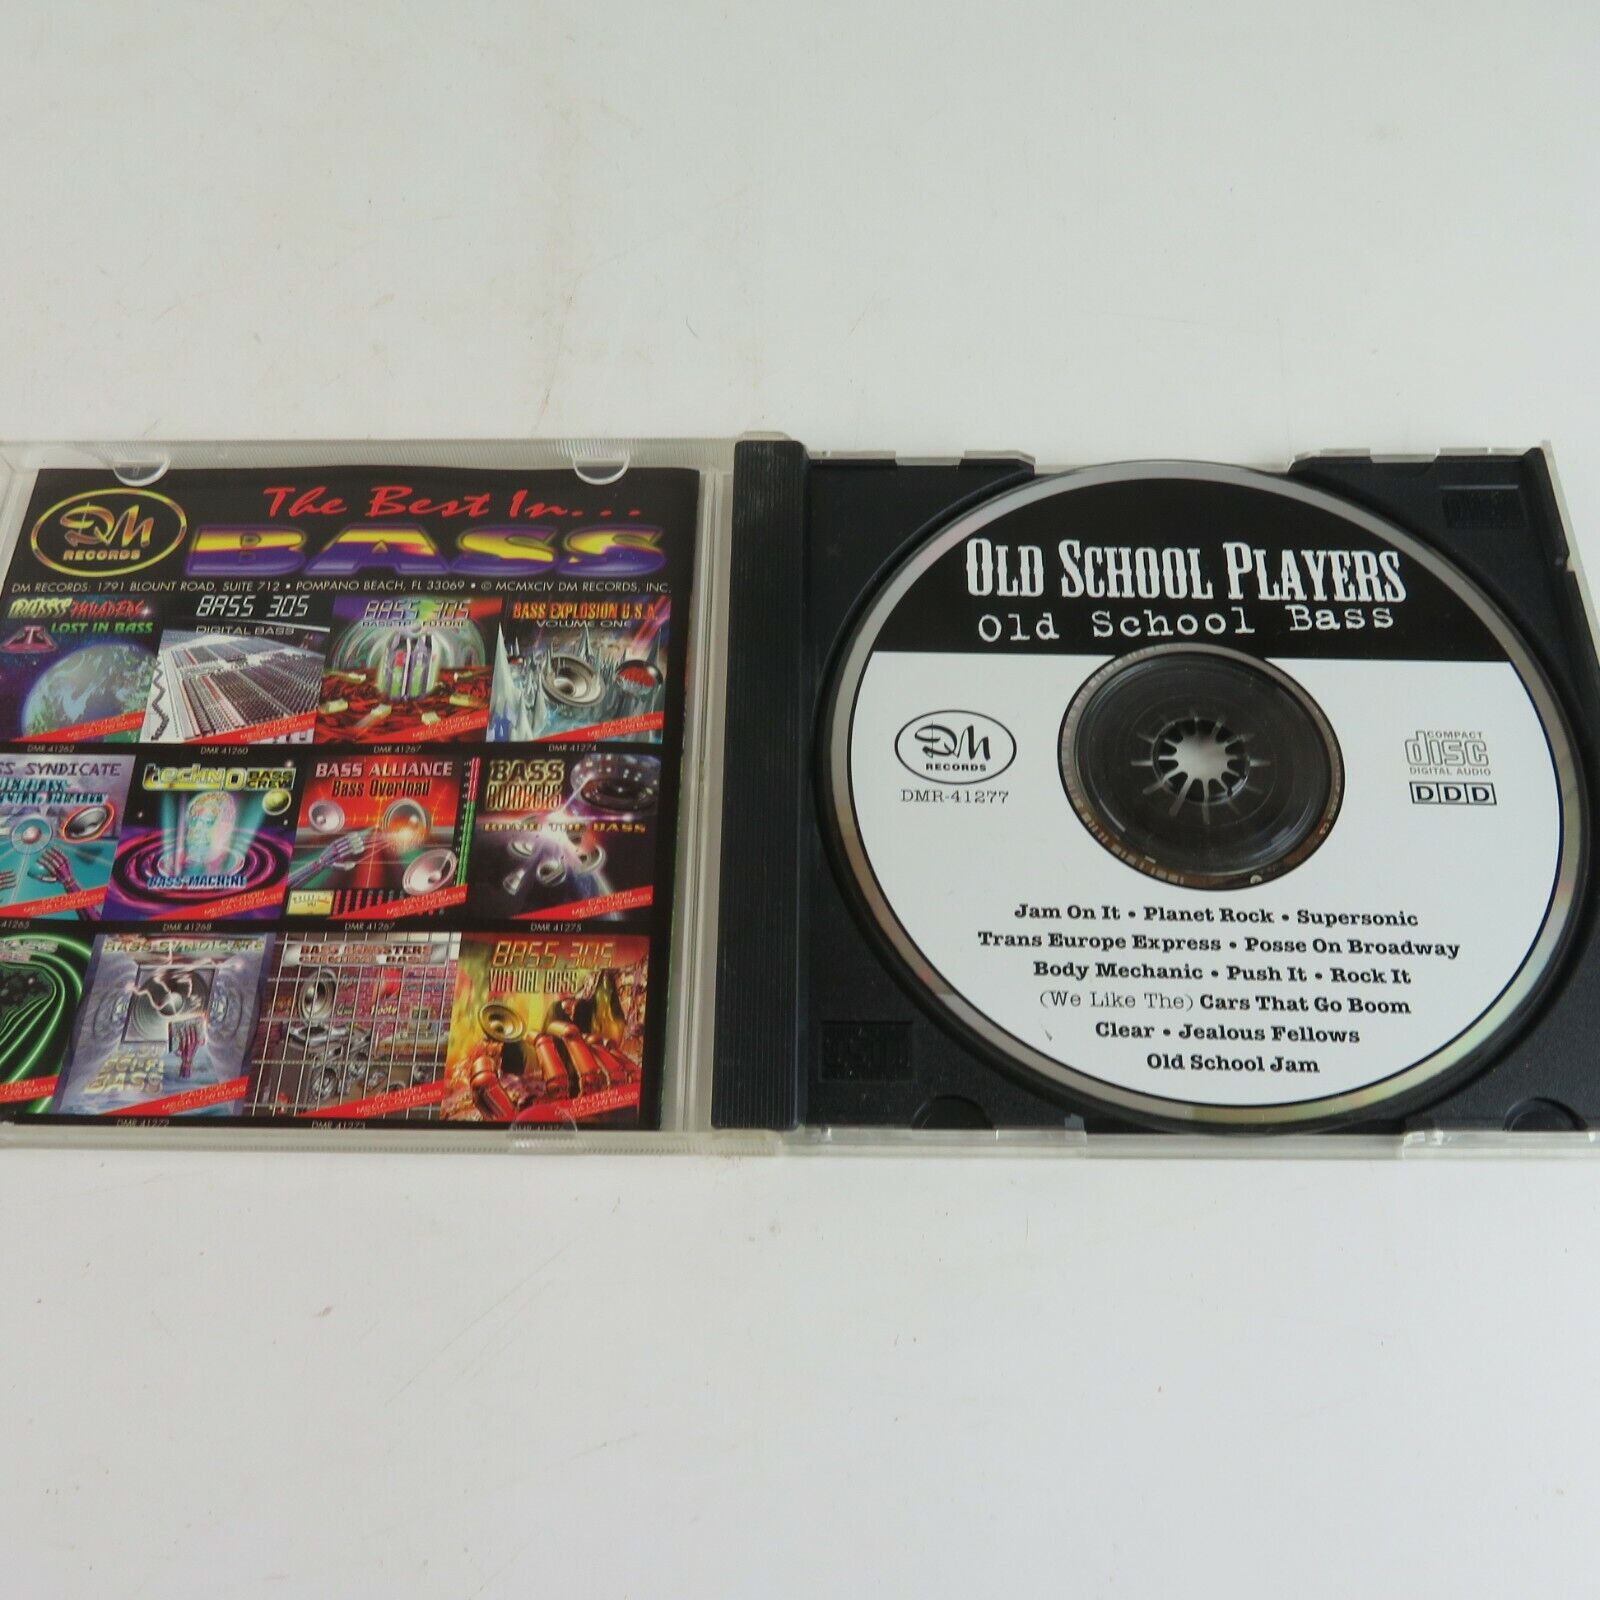 Vintage Old School Players - old school bass 1998 CD